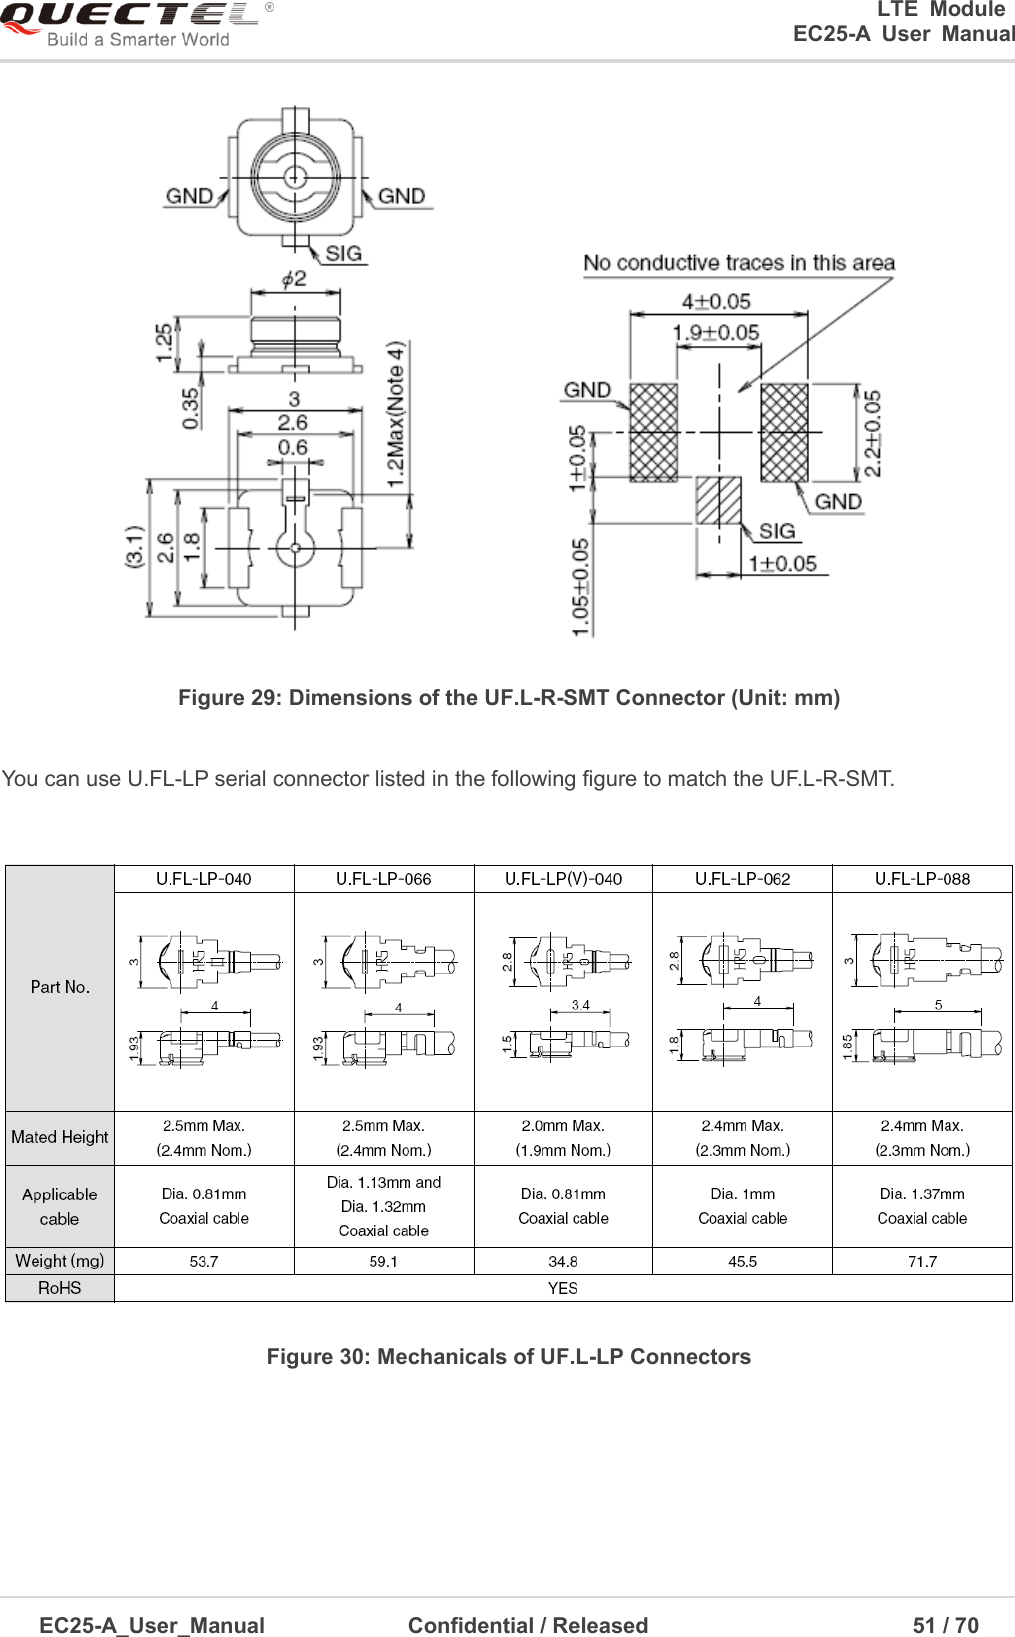 0      LTE  Module      EC25-A  User  Manual EC25-A_User_Manual  Confidential / Released      51 / 7  Figure 29: Dimensions of the UF.L-R-SMT Connector (Unit: mm) You can use U.FL-LP serial connector listed in the following figure to match the UF.L-R-SMT. Figure 30: Mechanicals of UF.L-LP Connectors 